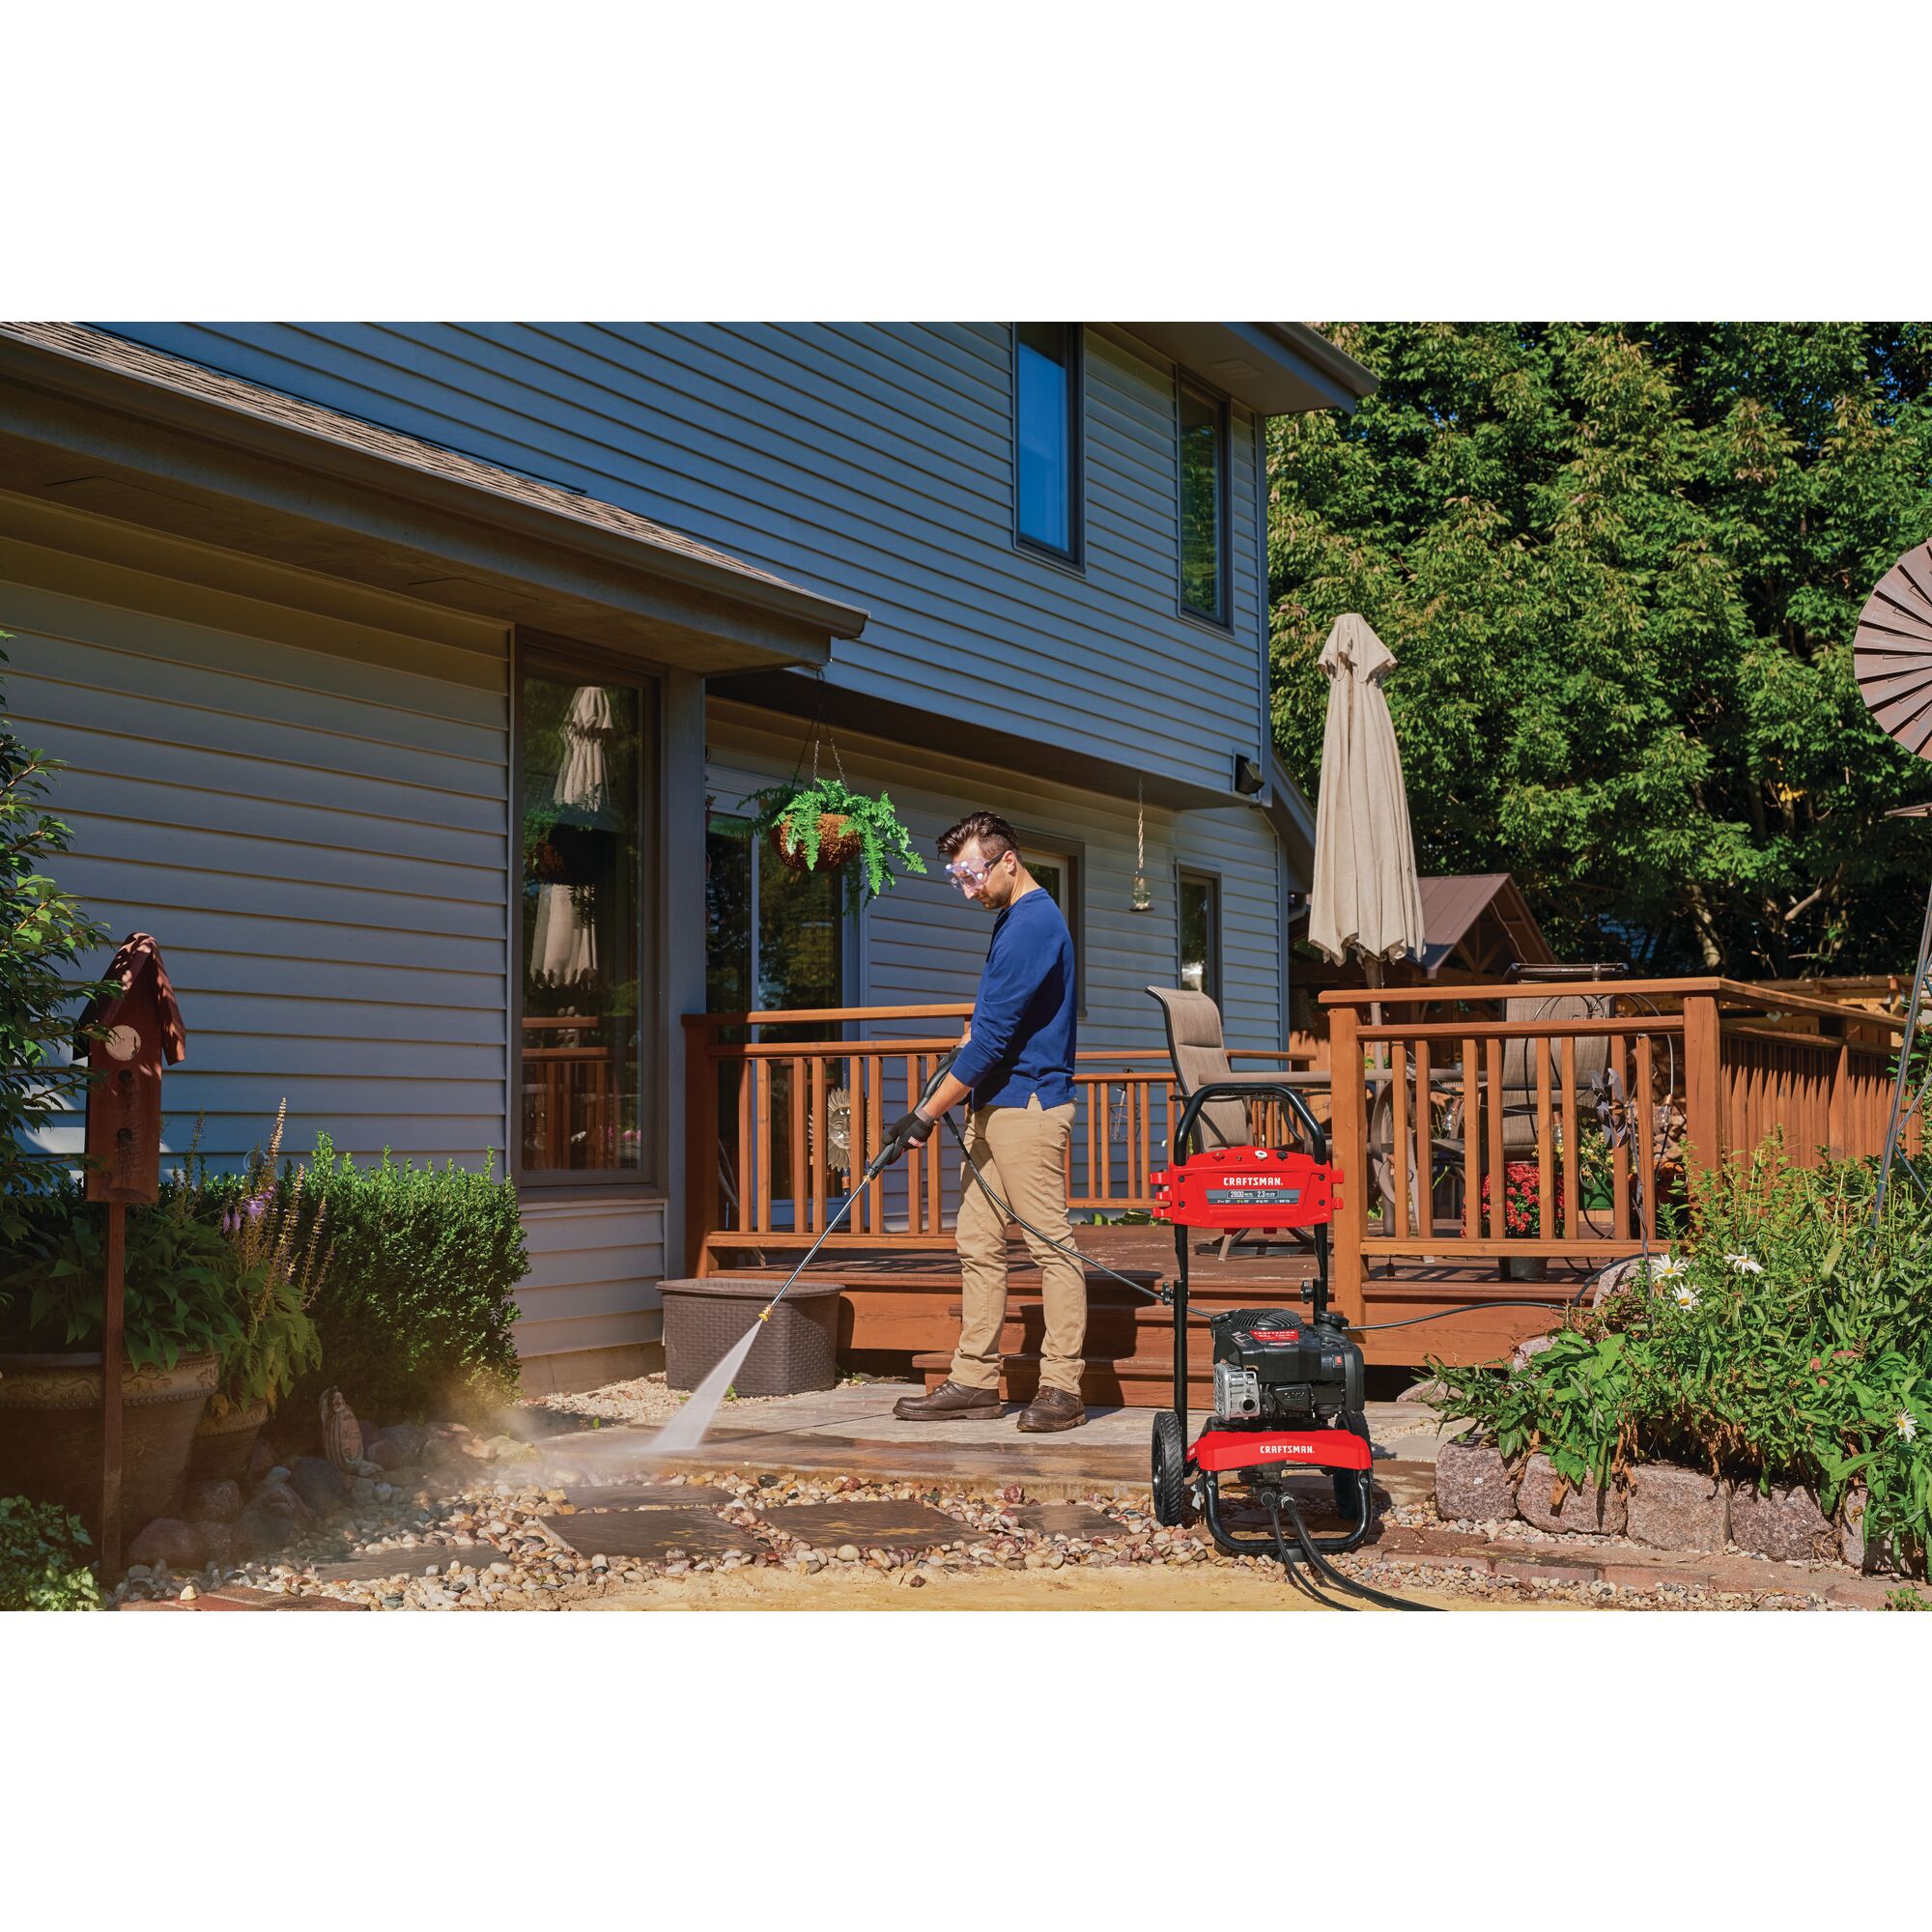 2800 MAX Pounds per Square Inch or 2 and three tenths MAX Gallons Per Minute Pressure Washer being used by person to wash stoned pavement in home garden outdoors.